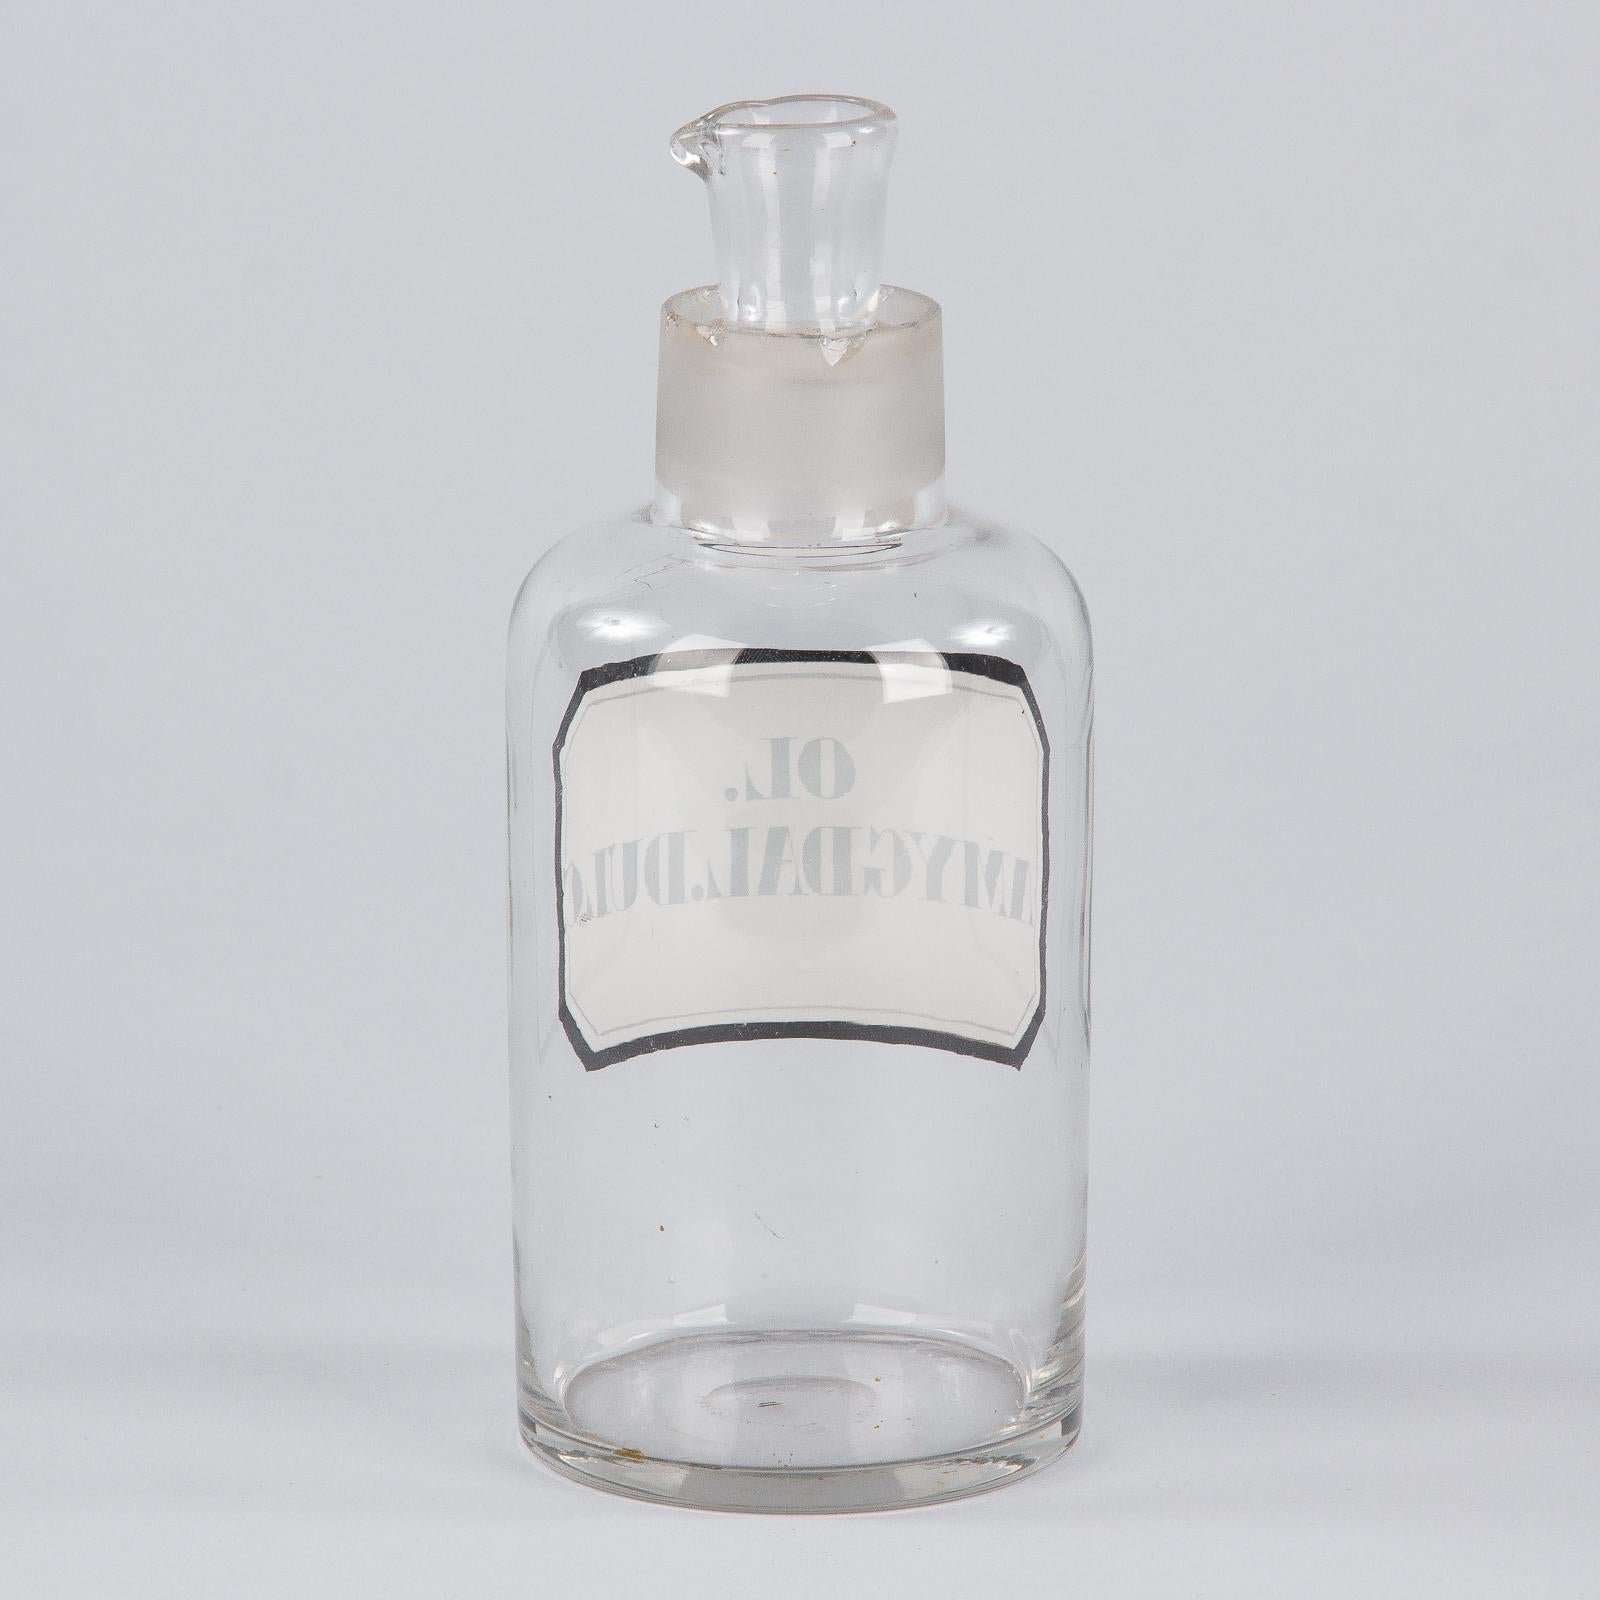 French Apothecary Glass Jar from Alsace Region, Circa 1900s For Sale 9